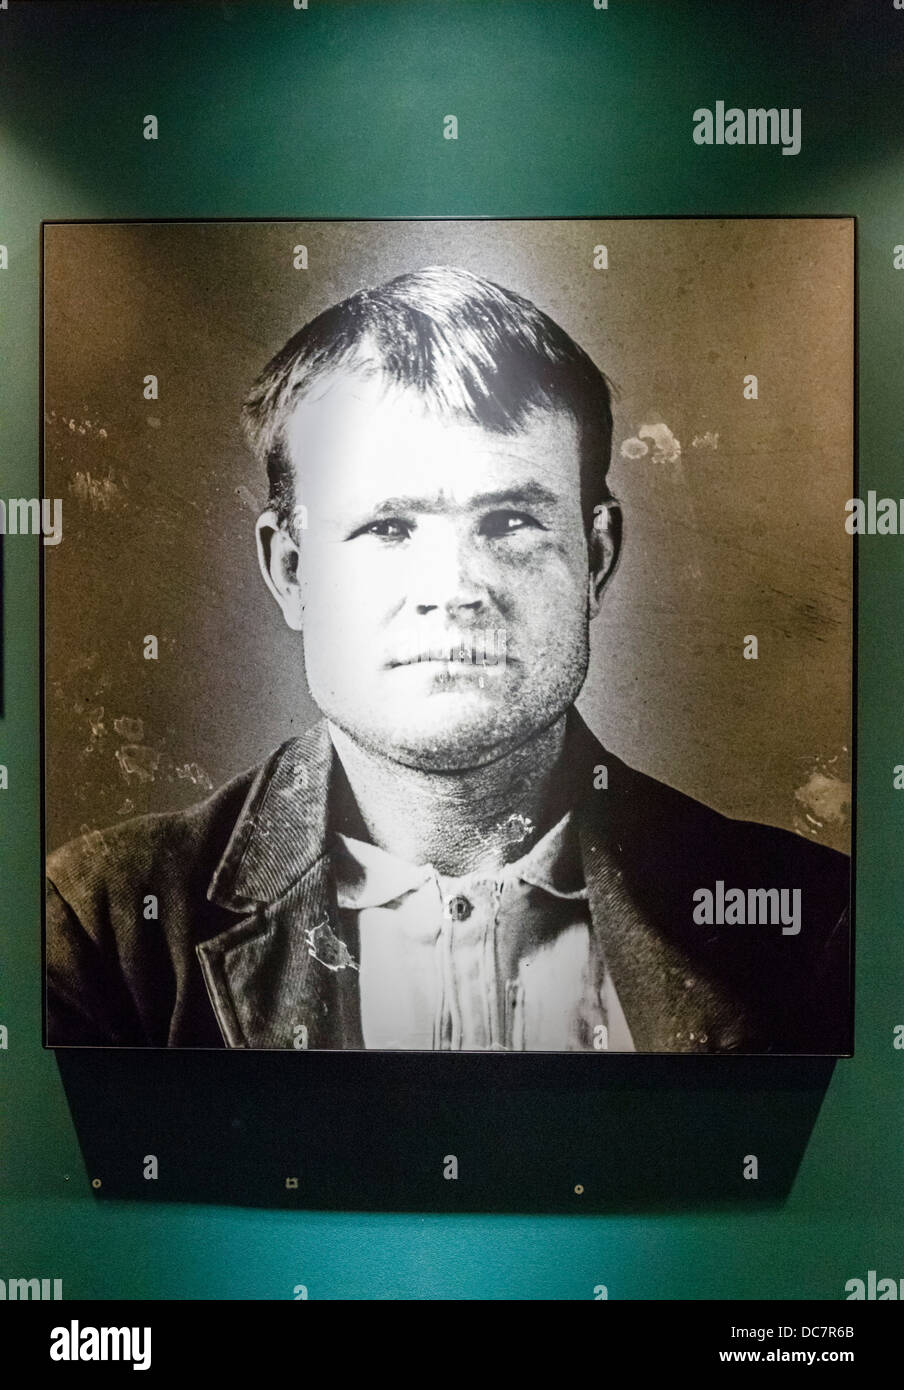 Mugshot of outlaw Butch Cassidy in Wyoming Territorial Prison Museum, where he spent 18 months in 1896, Laramie, Wyoming, USA Stock Photo